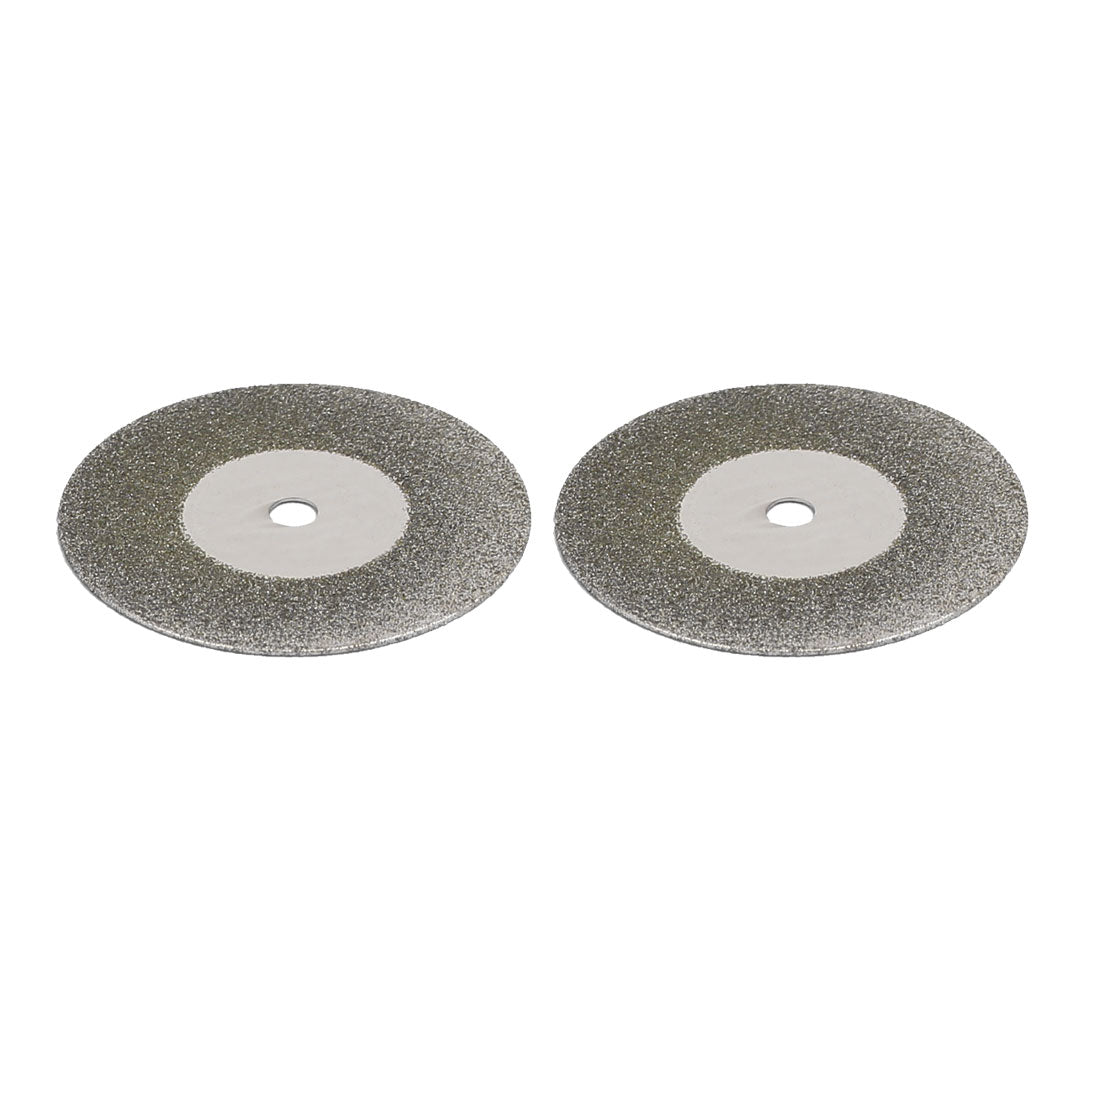 uxcell Uxcell 30mm Dia Diamond Coated Flat Lap Disk Wheel Grinding Sanding Disc 2pcs